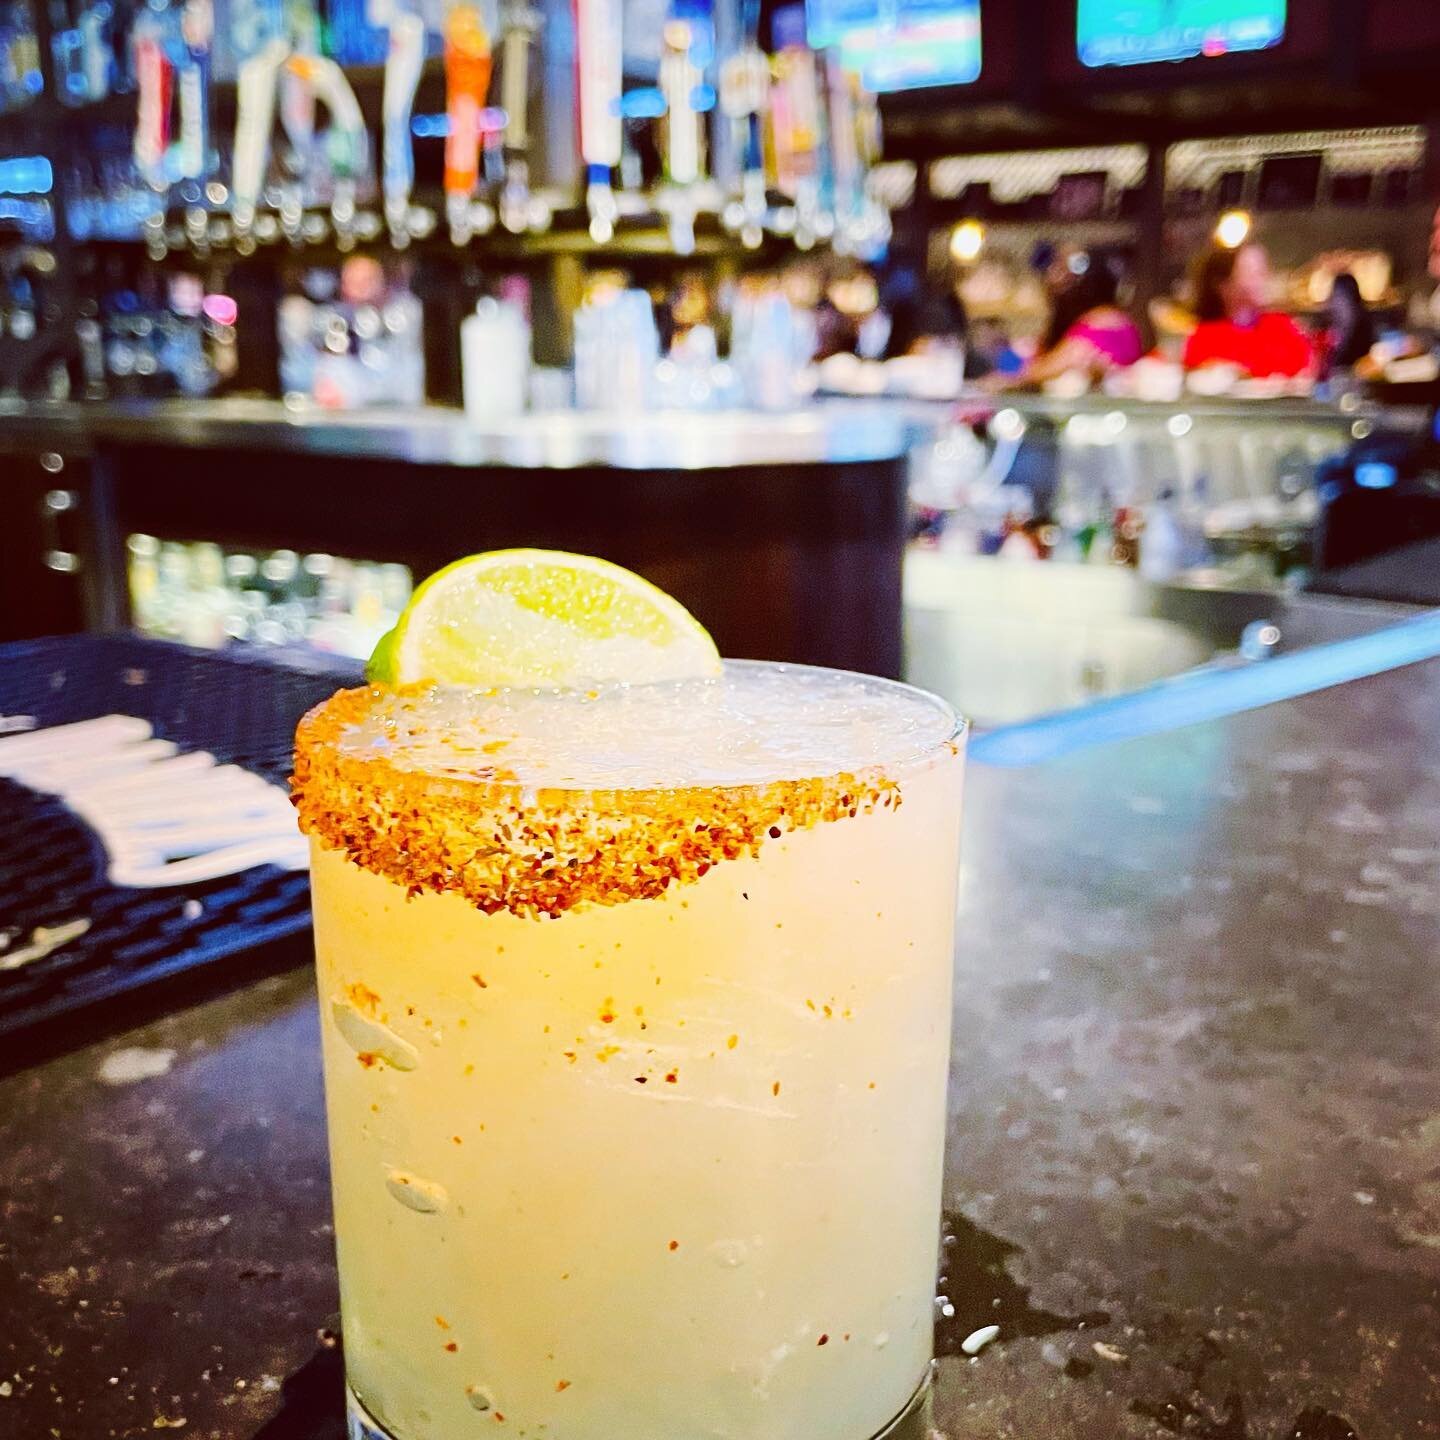 💥The Hall Of Famer💥 Our version of the Margarita, but with an Ancho Chili spice kicker🌶 

Available at Tap Sports Bar inside the @mgmgrand 
.
.
.
.
.
.
#barstarspodcast #margarita #margaritas #tequila #spicymargarita #cocktails #cocktail #cocktail